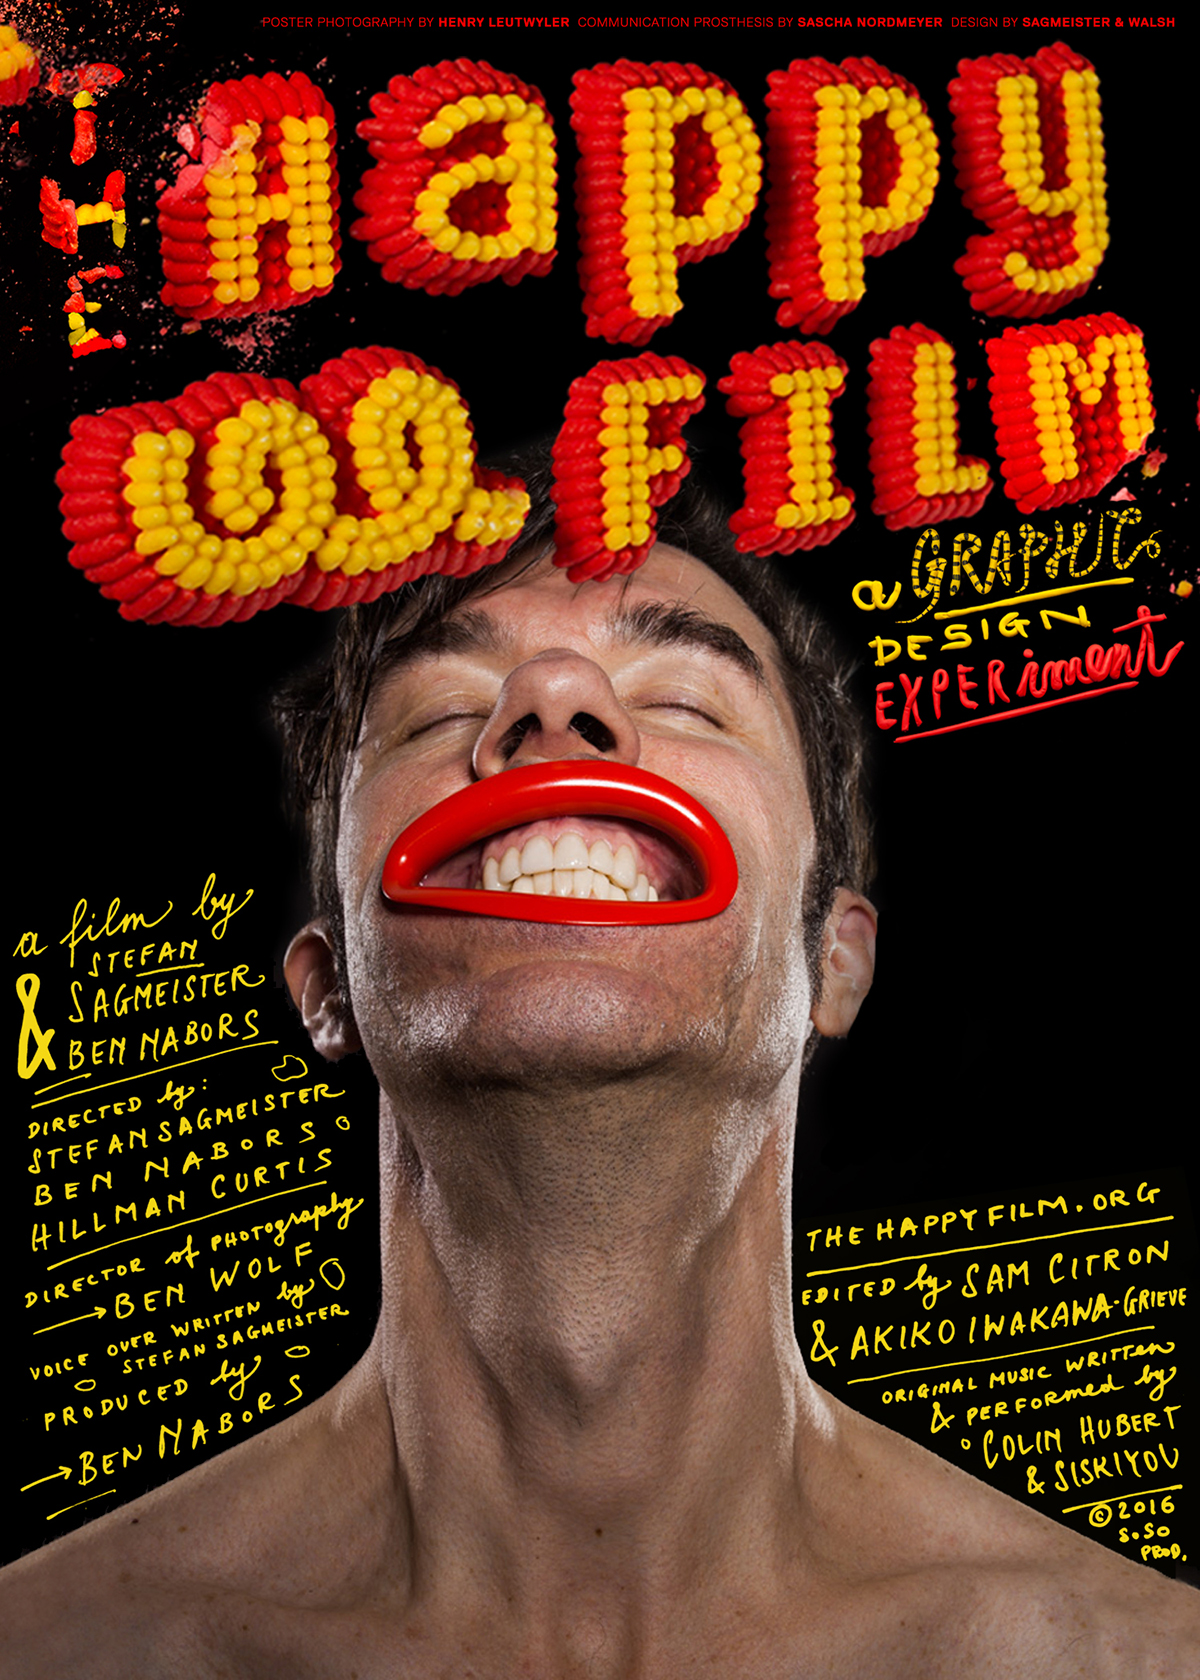 Sagmeister's poster for his 'Happy Film'.